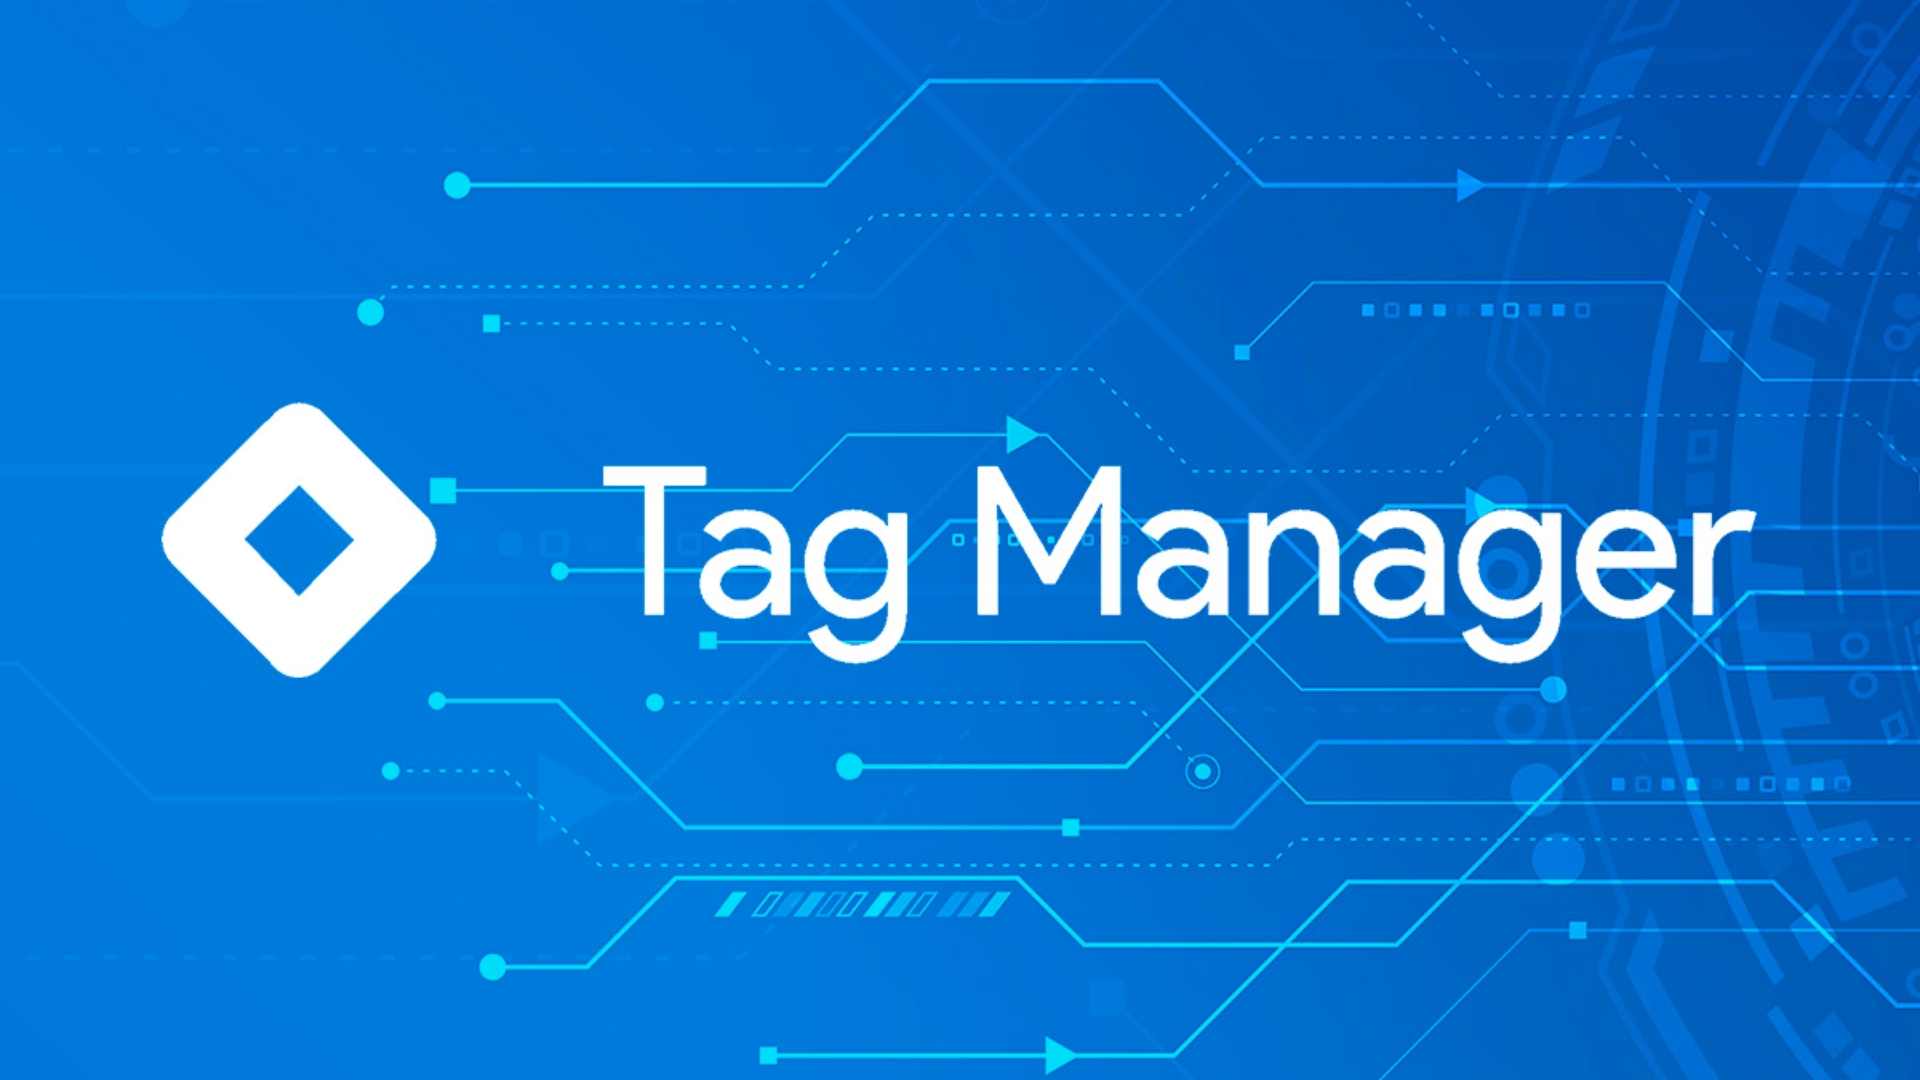 google tag manager services logo in white with blue background and technology element on it